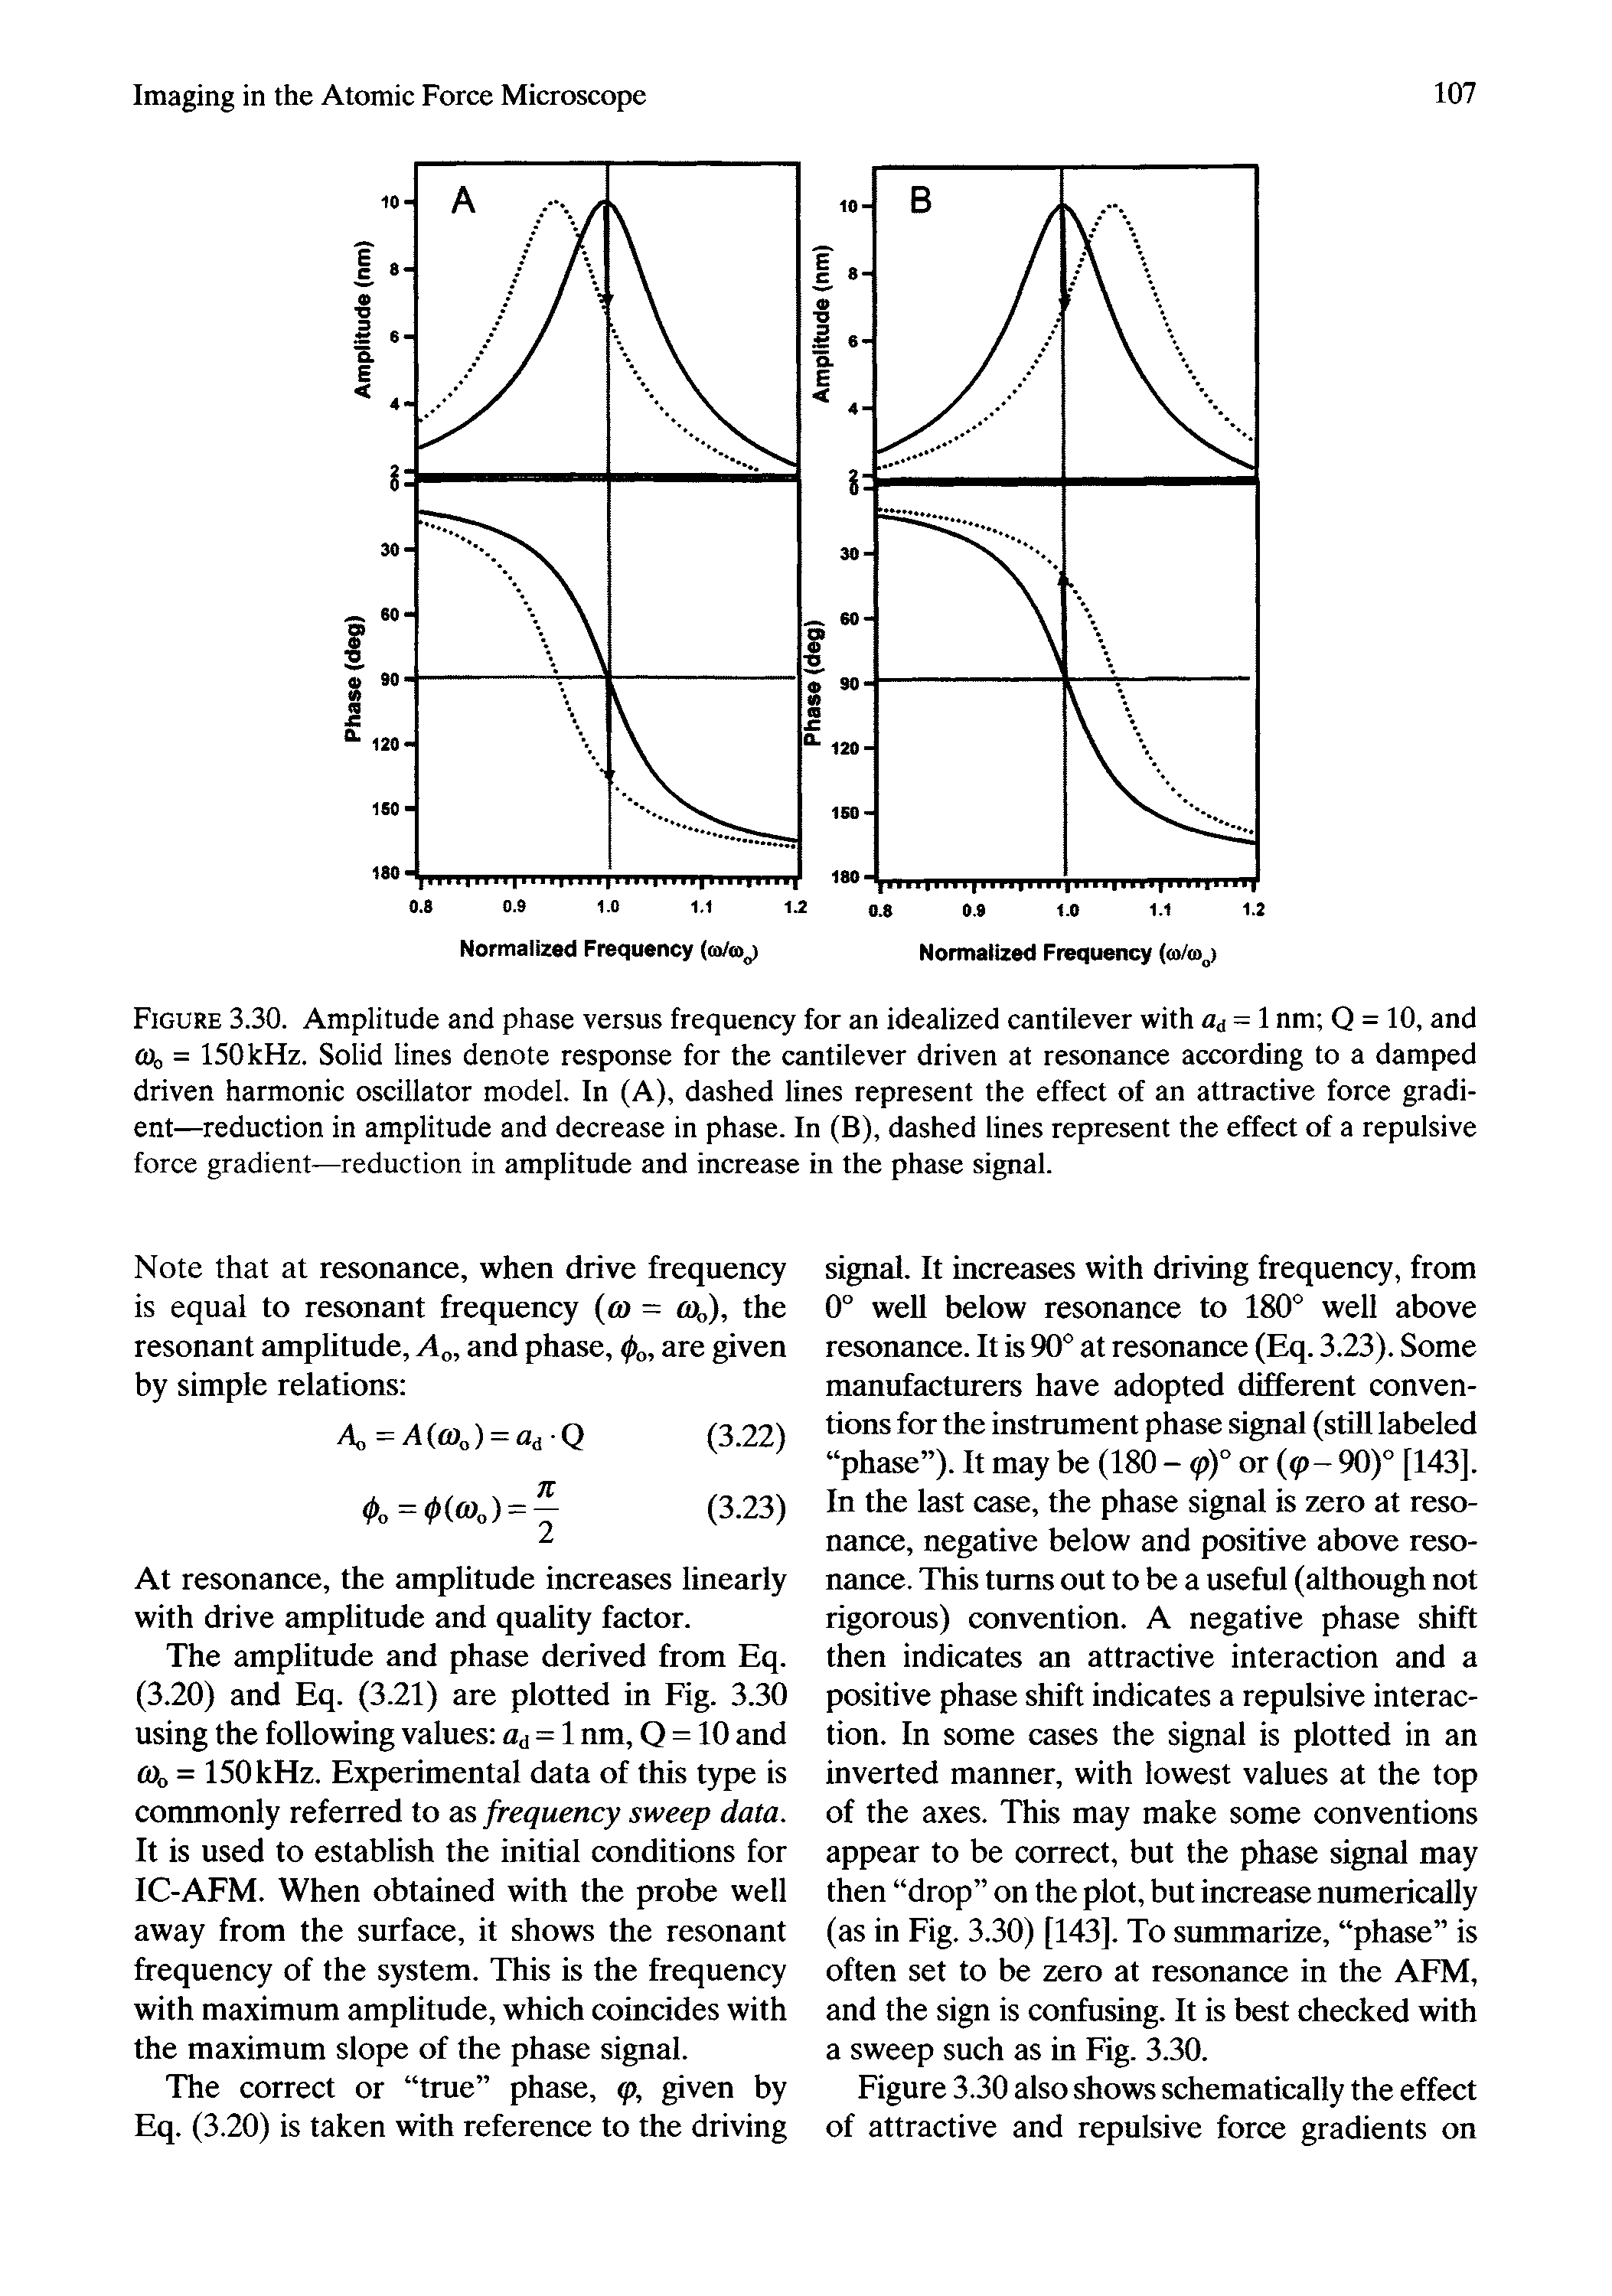 Figure 3.30. Amplitude and phase versus frequency for an idealized cantilever with Oi = nm Q = 10, and (Oo = 150 kHz. Solid lines denote response for the cantilever driven at resonance according to a damped driven harmonic oscillator model. In (A), dashed lines represent the effect of an attractive force gradient—reduction in amplitude and decrease in phase. In (B), dashed lines represent the effect of a repulsive...